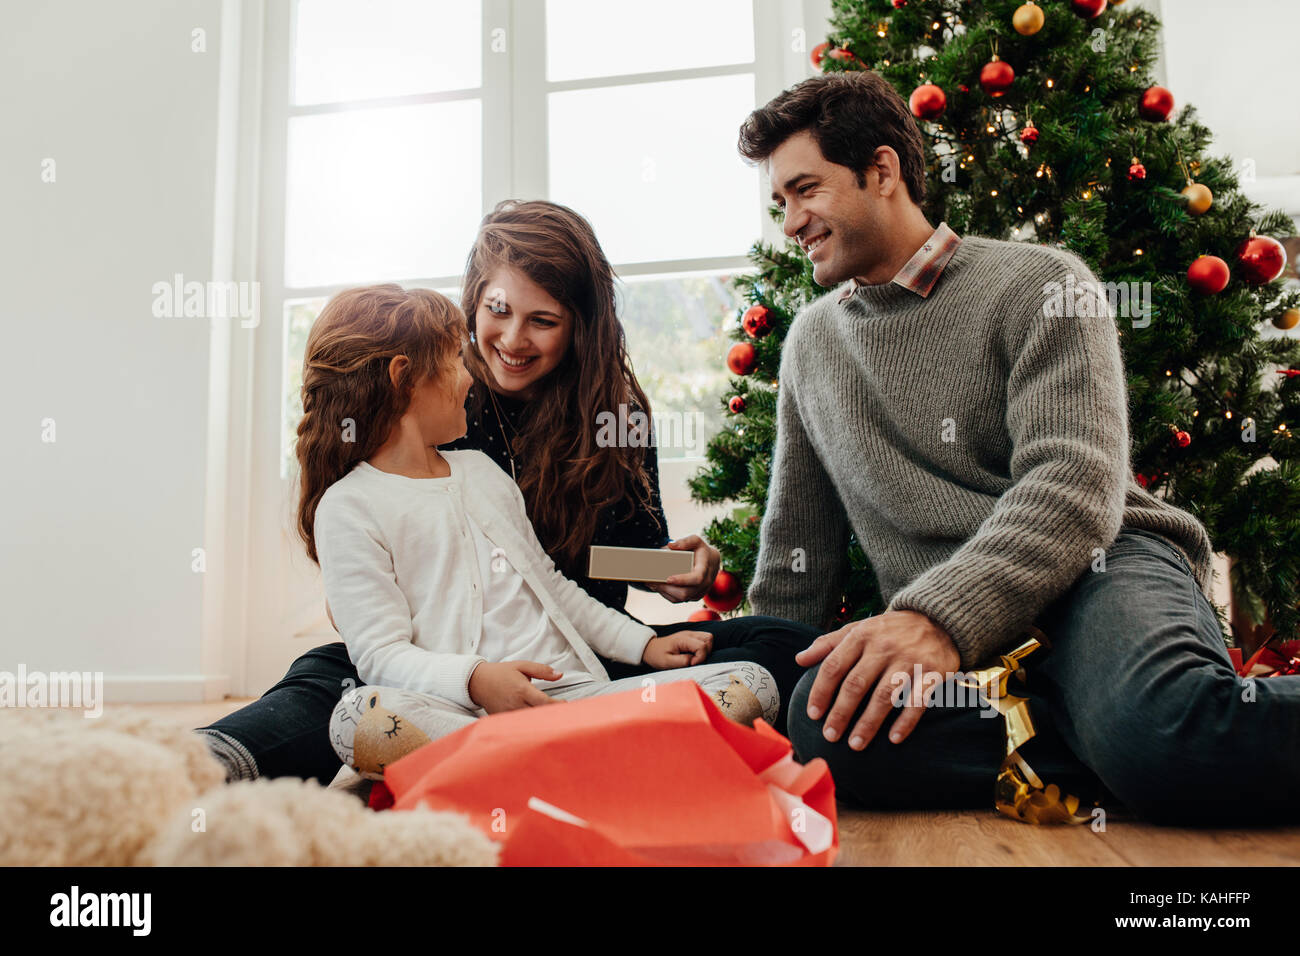 Family having happy time celebrating Christmas at home. Young couple with their daughter opening gifts sitting near Christmas tree. Stock Photo